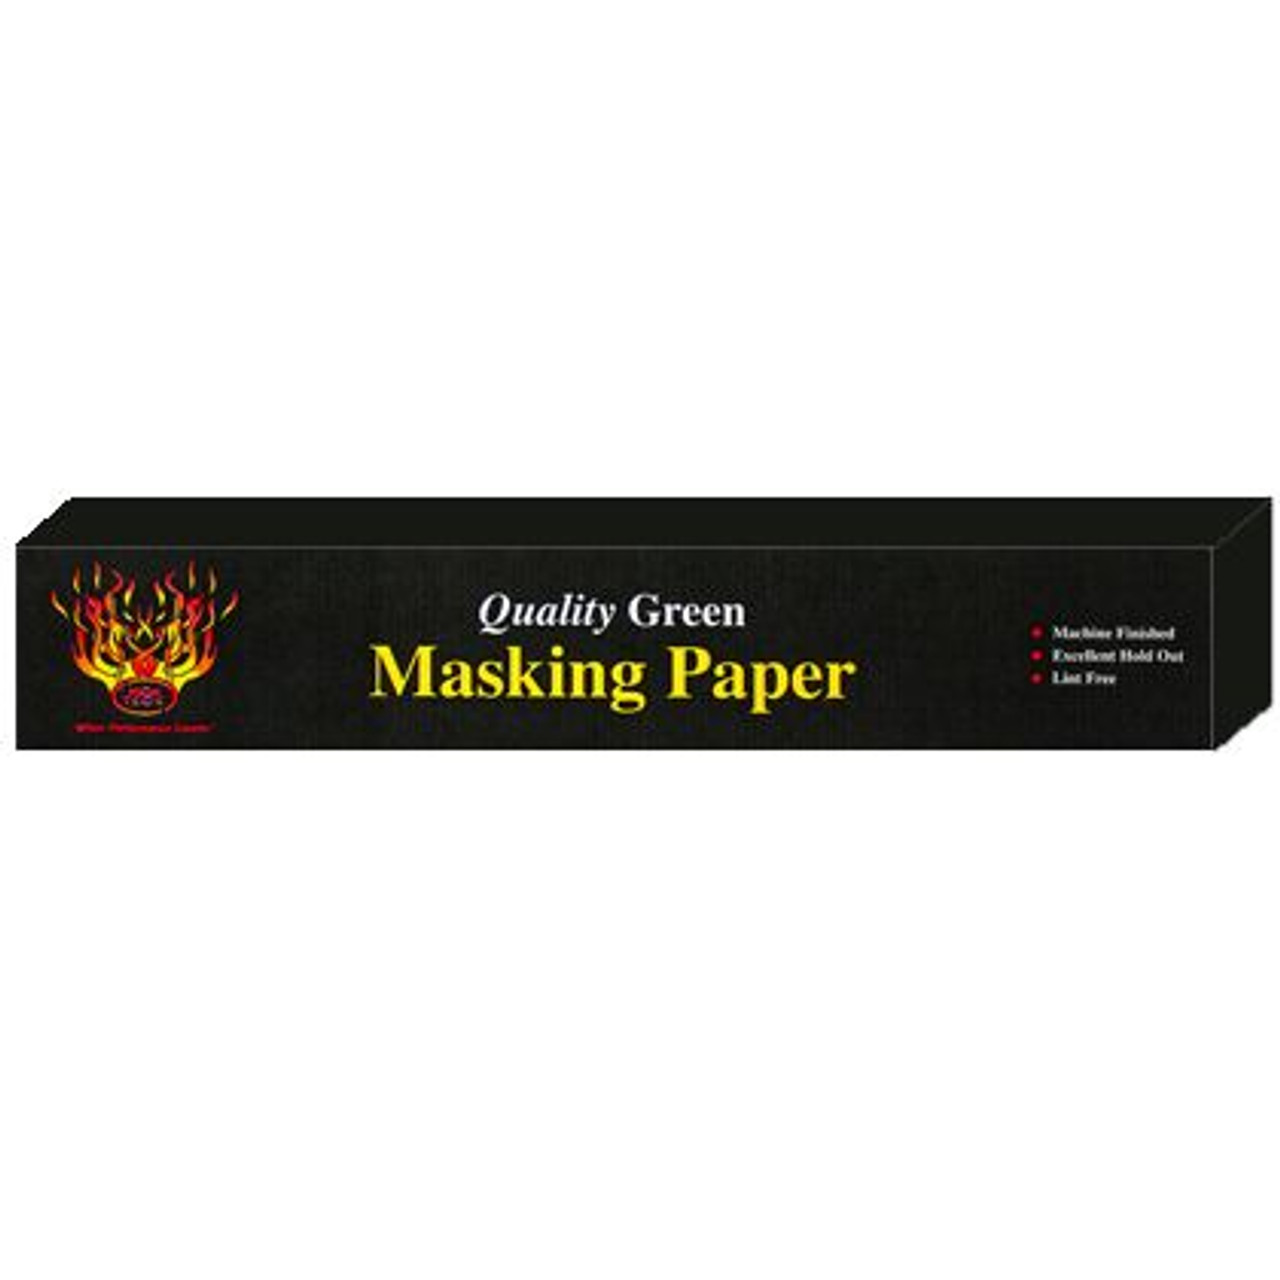 Quality Green Masking Paper, Weight: 35#, Size: 52" X 500'